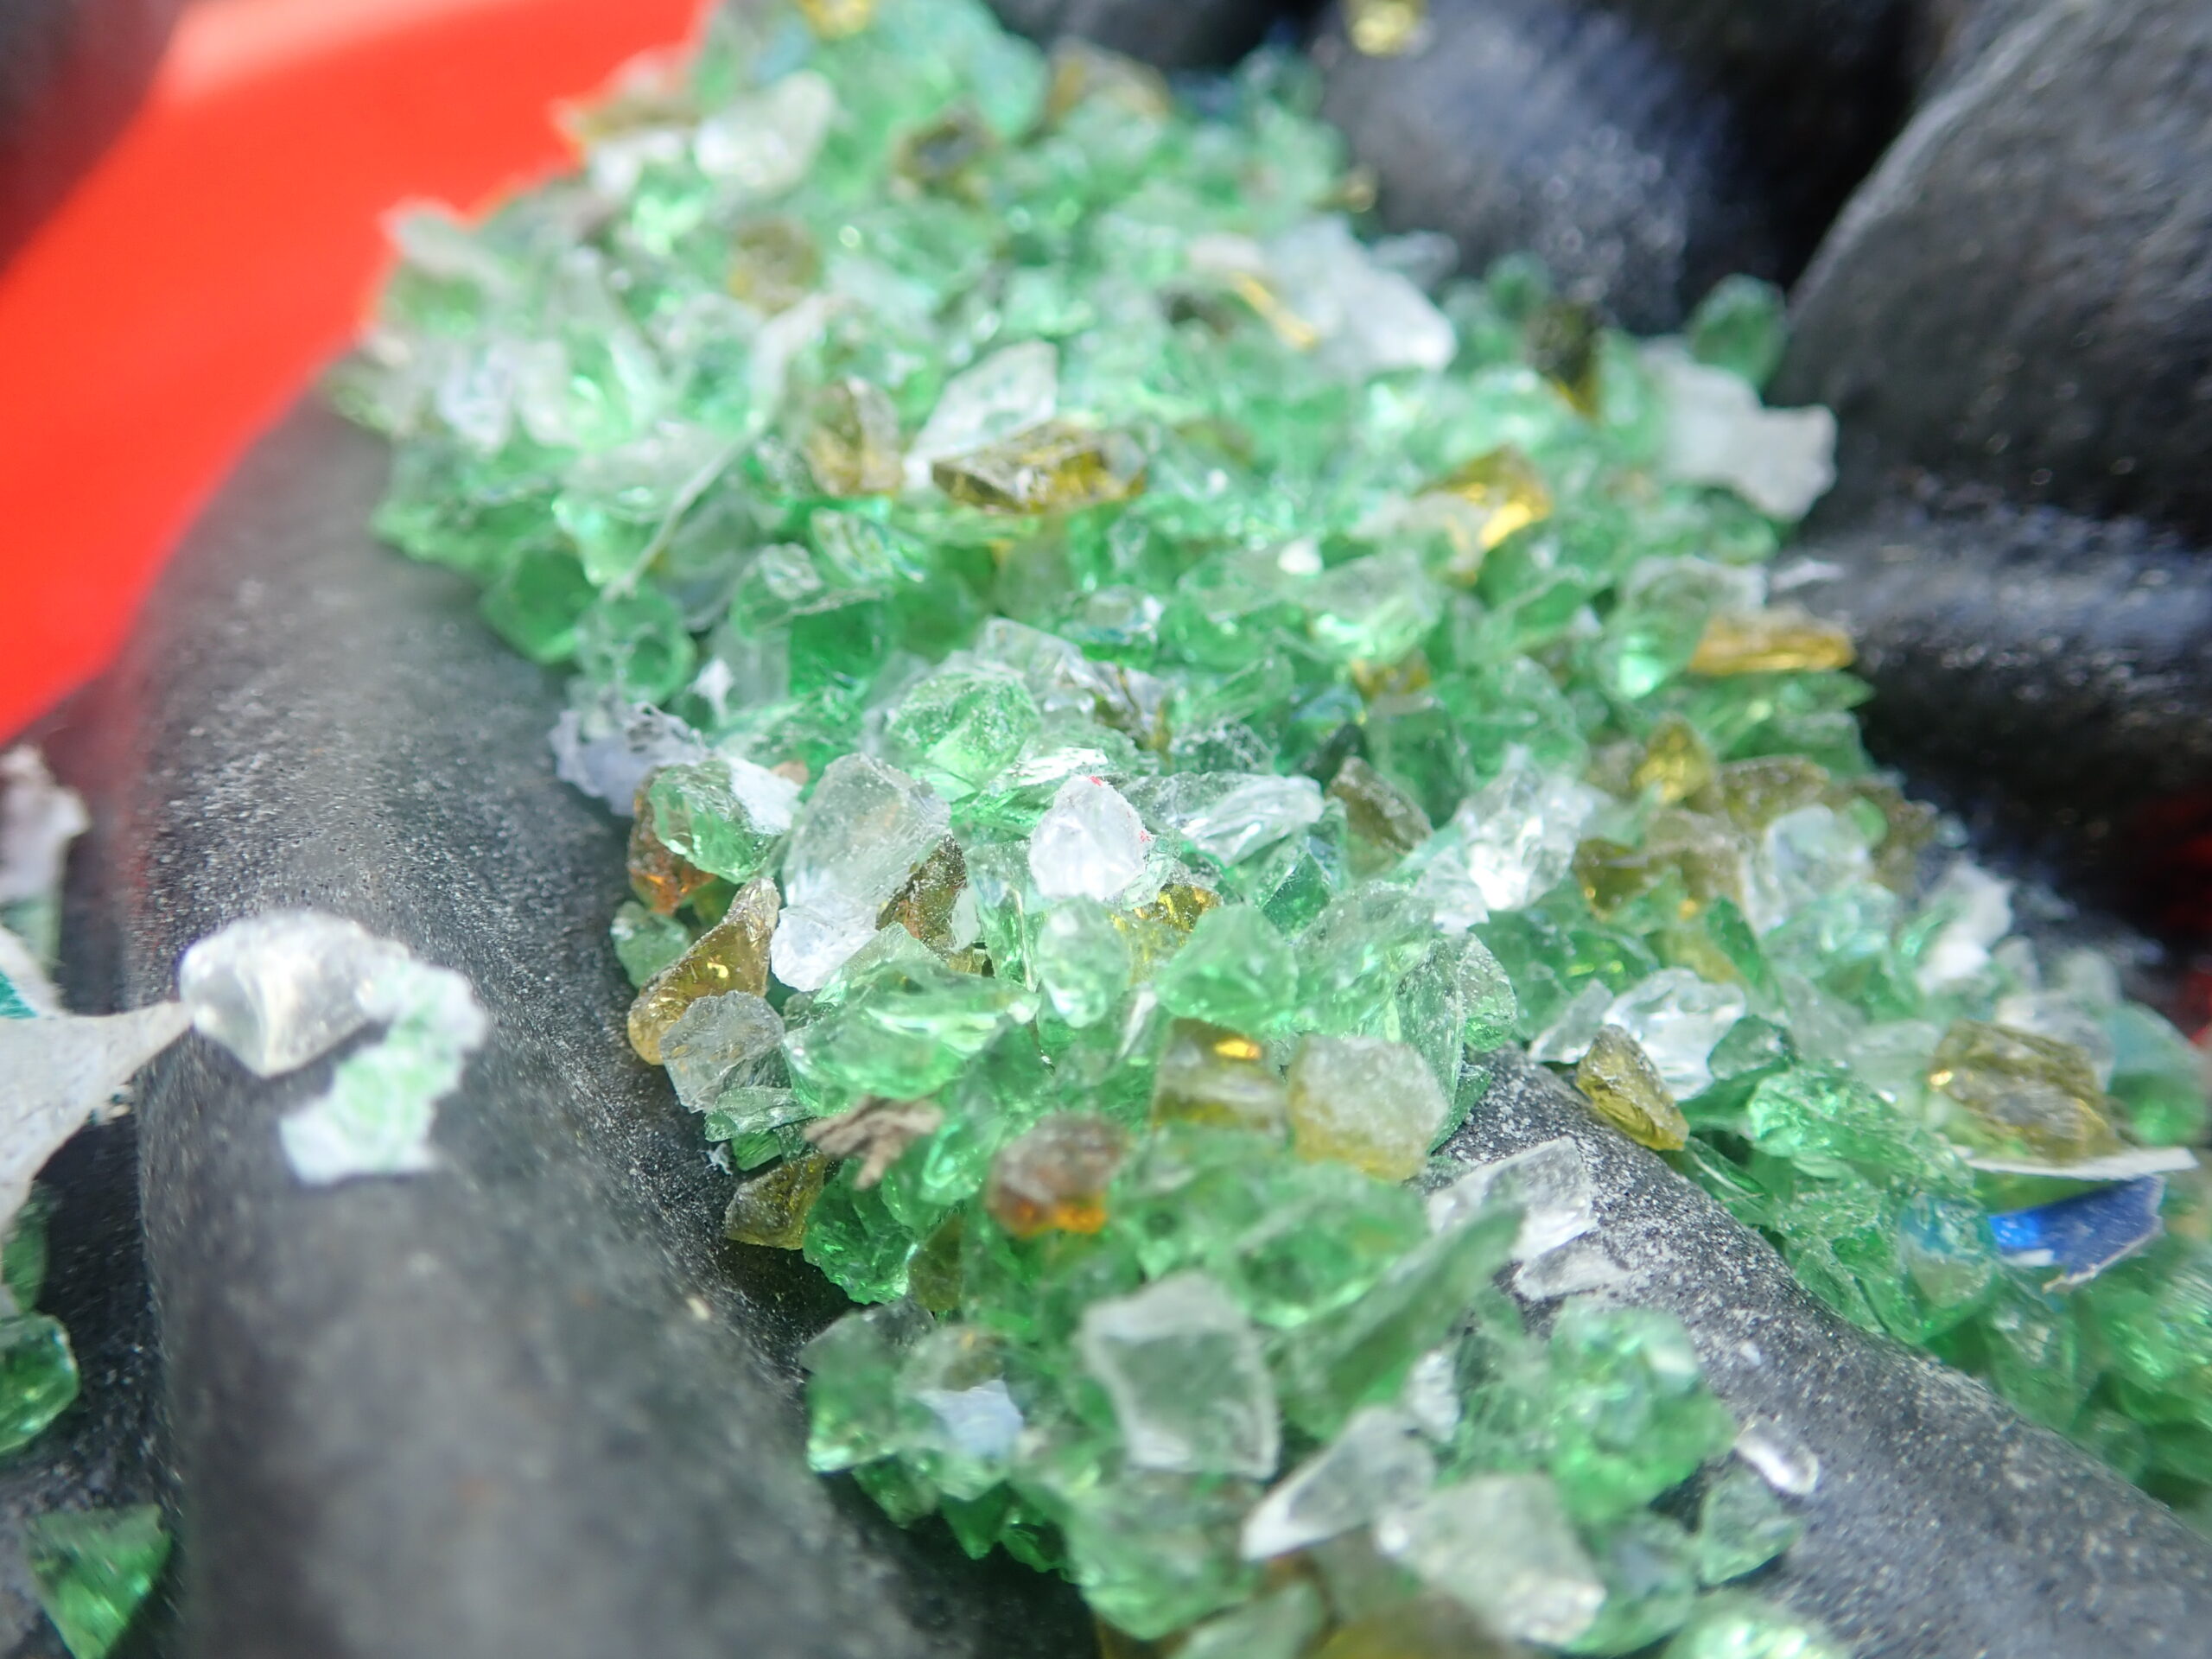 UVI’s Glass Crusher Project To Begin Accepting Glass Waste For Recycling Next Month